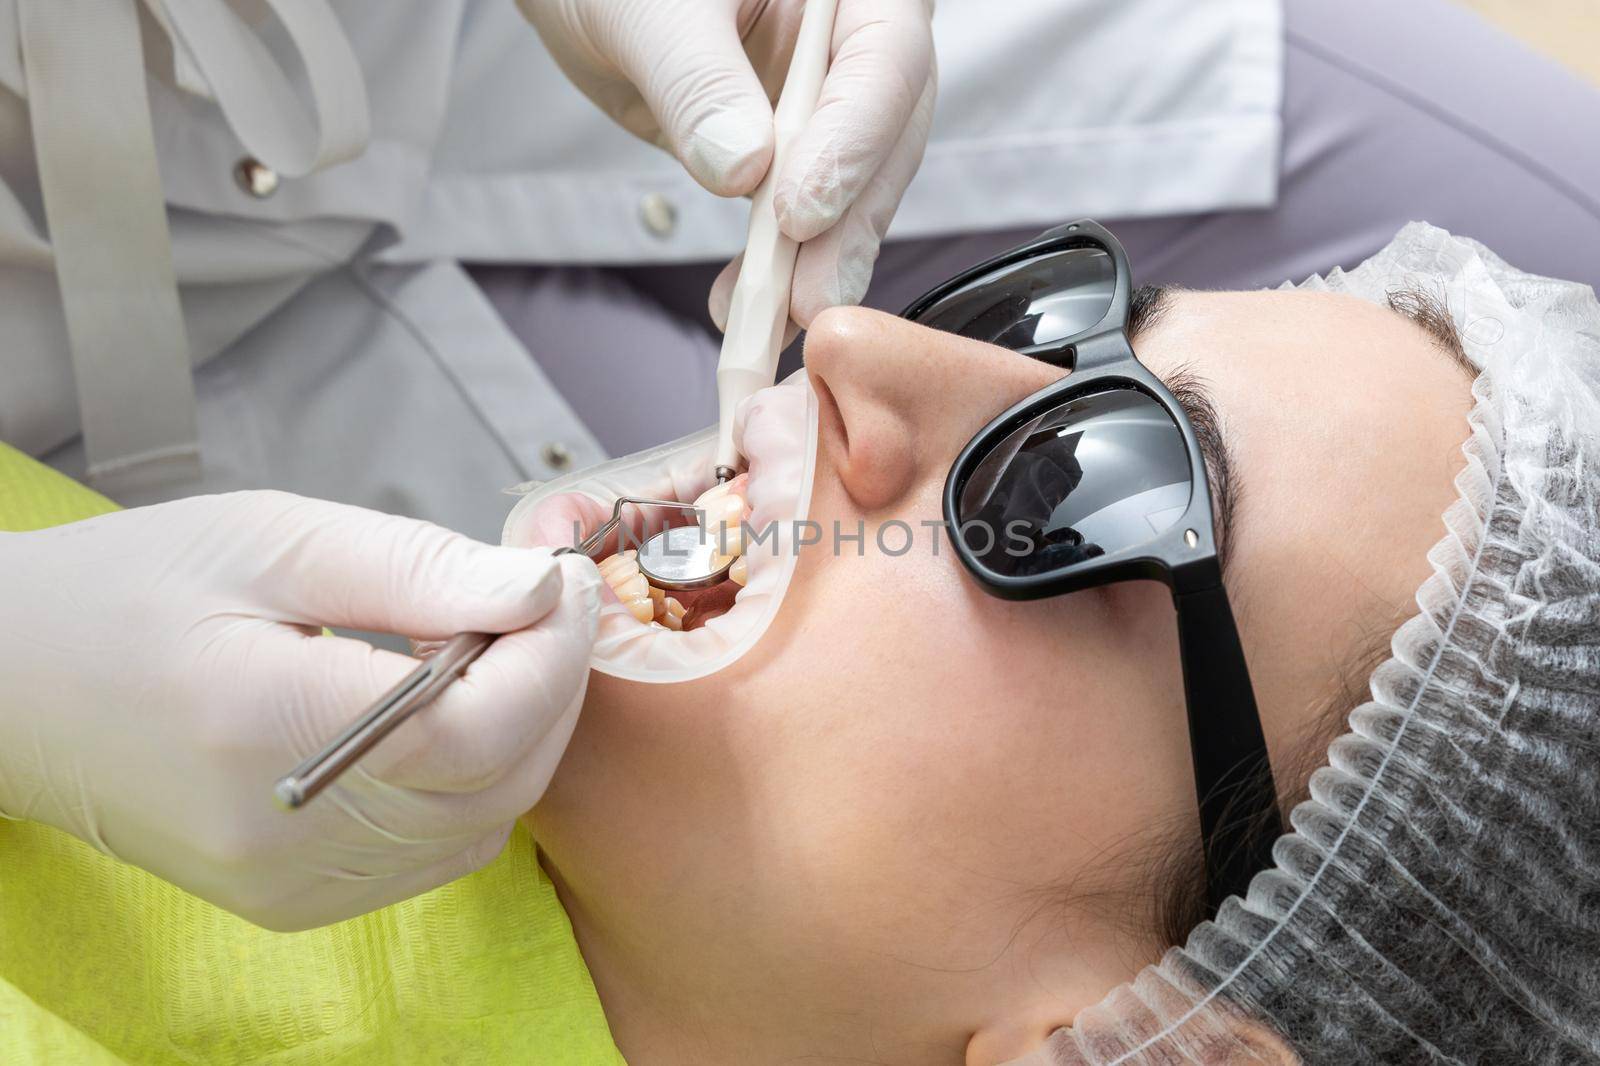 Dentist Examining Patient's Mouth with dental mirror In Clinic. Checkup concept